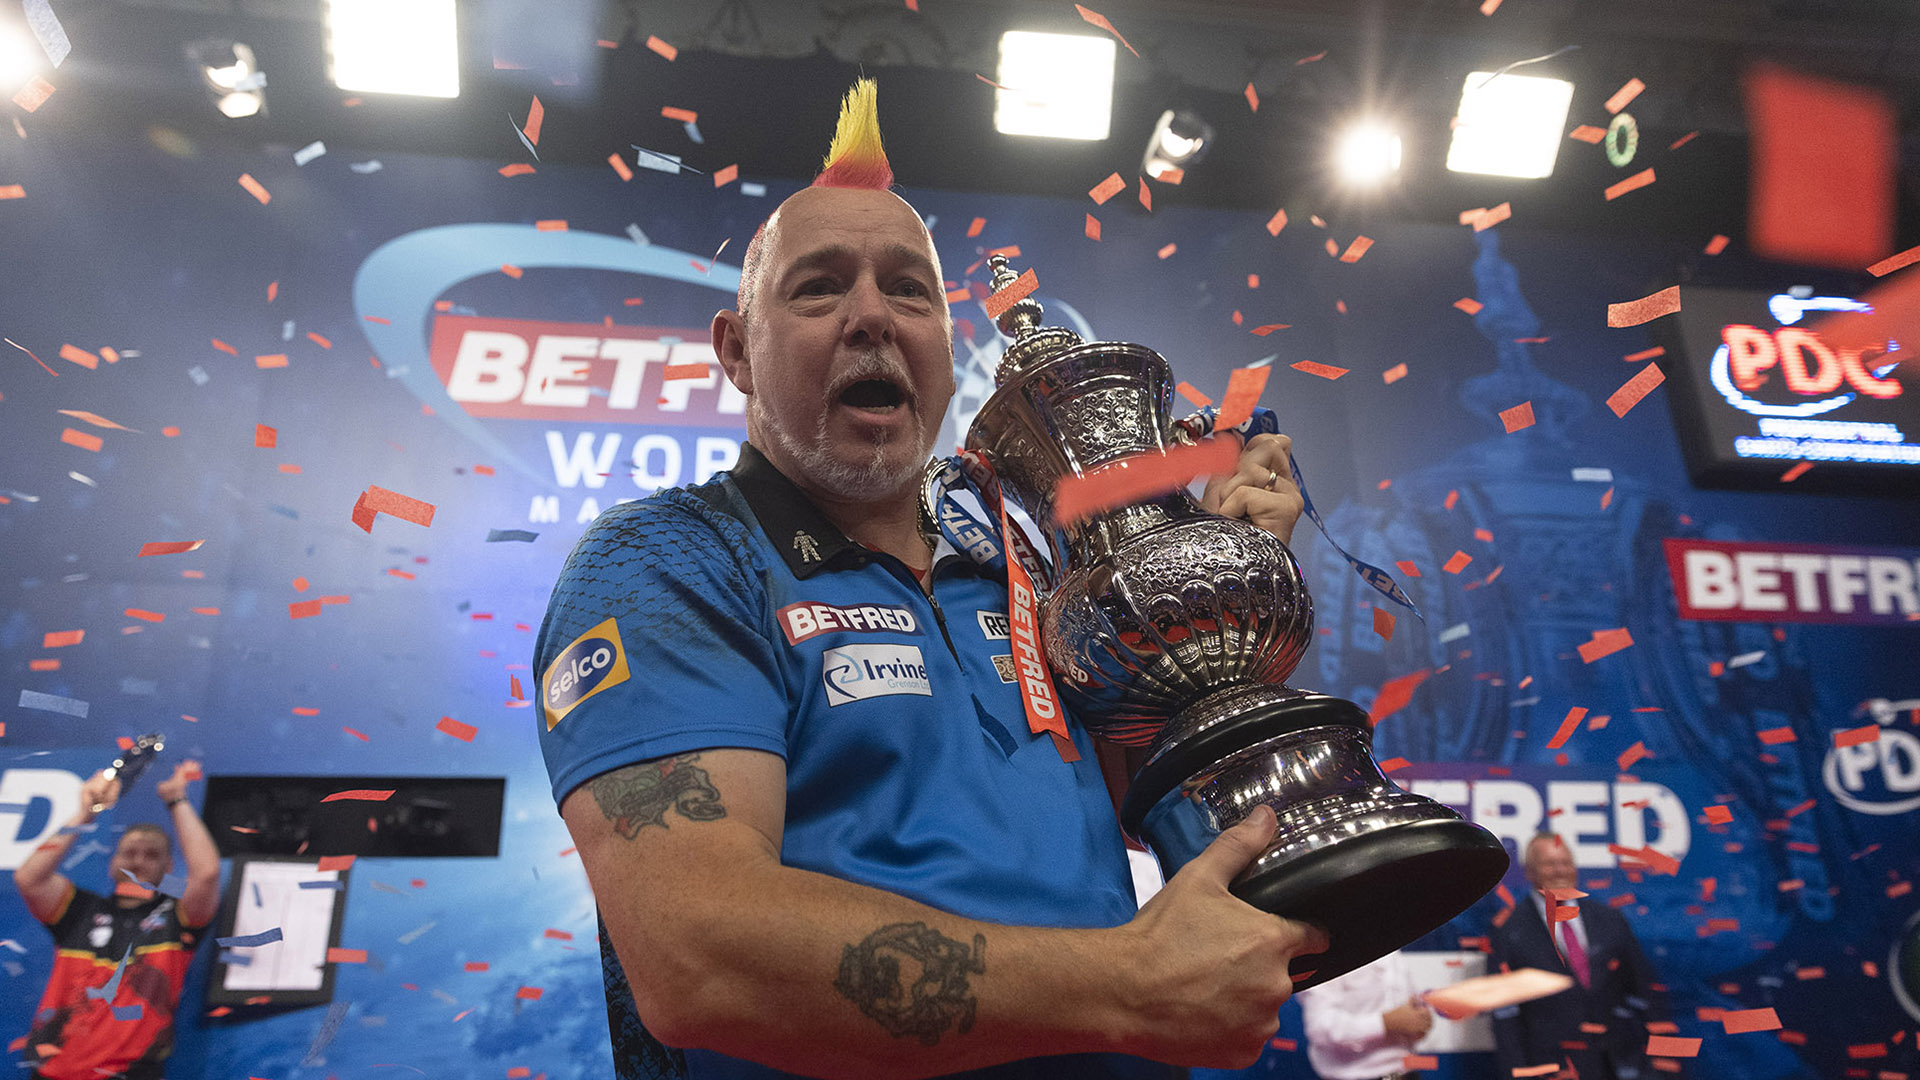 Gooey Tigge hierarki World Matchplay Darts 2021: Draw, schedule, results, betting odds and TV  coverage details